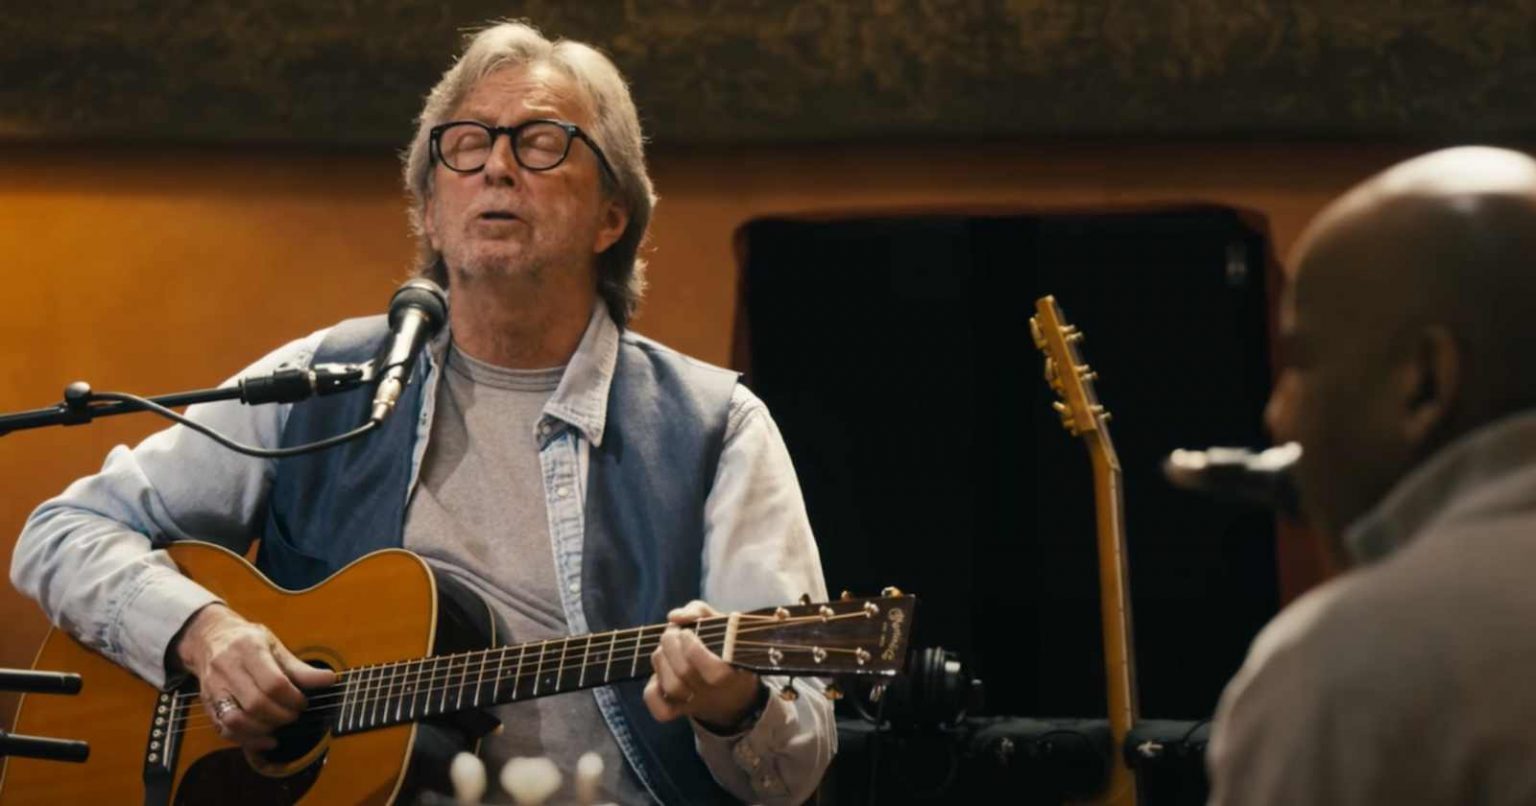 Eric Clapton announces new tour dates with Jimmie Vaughan